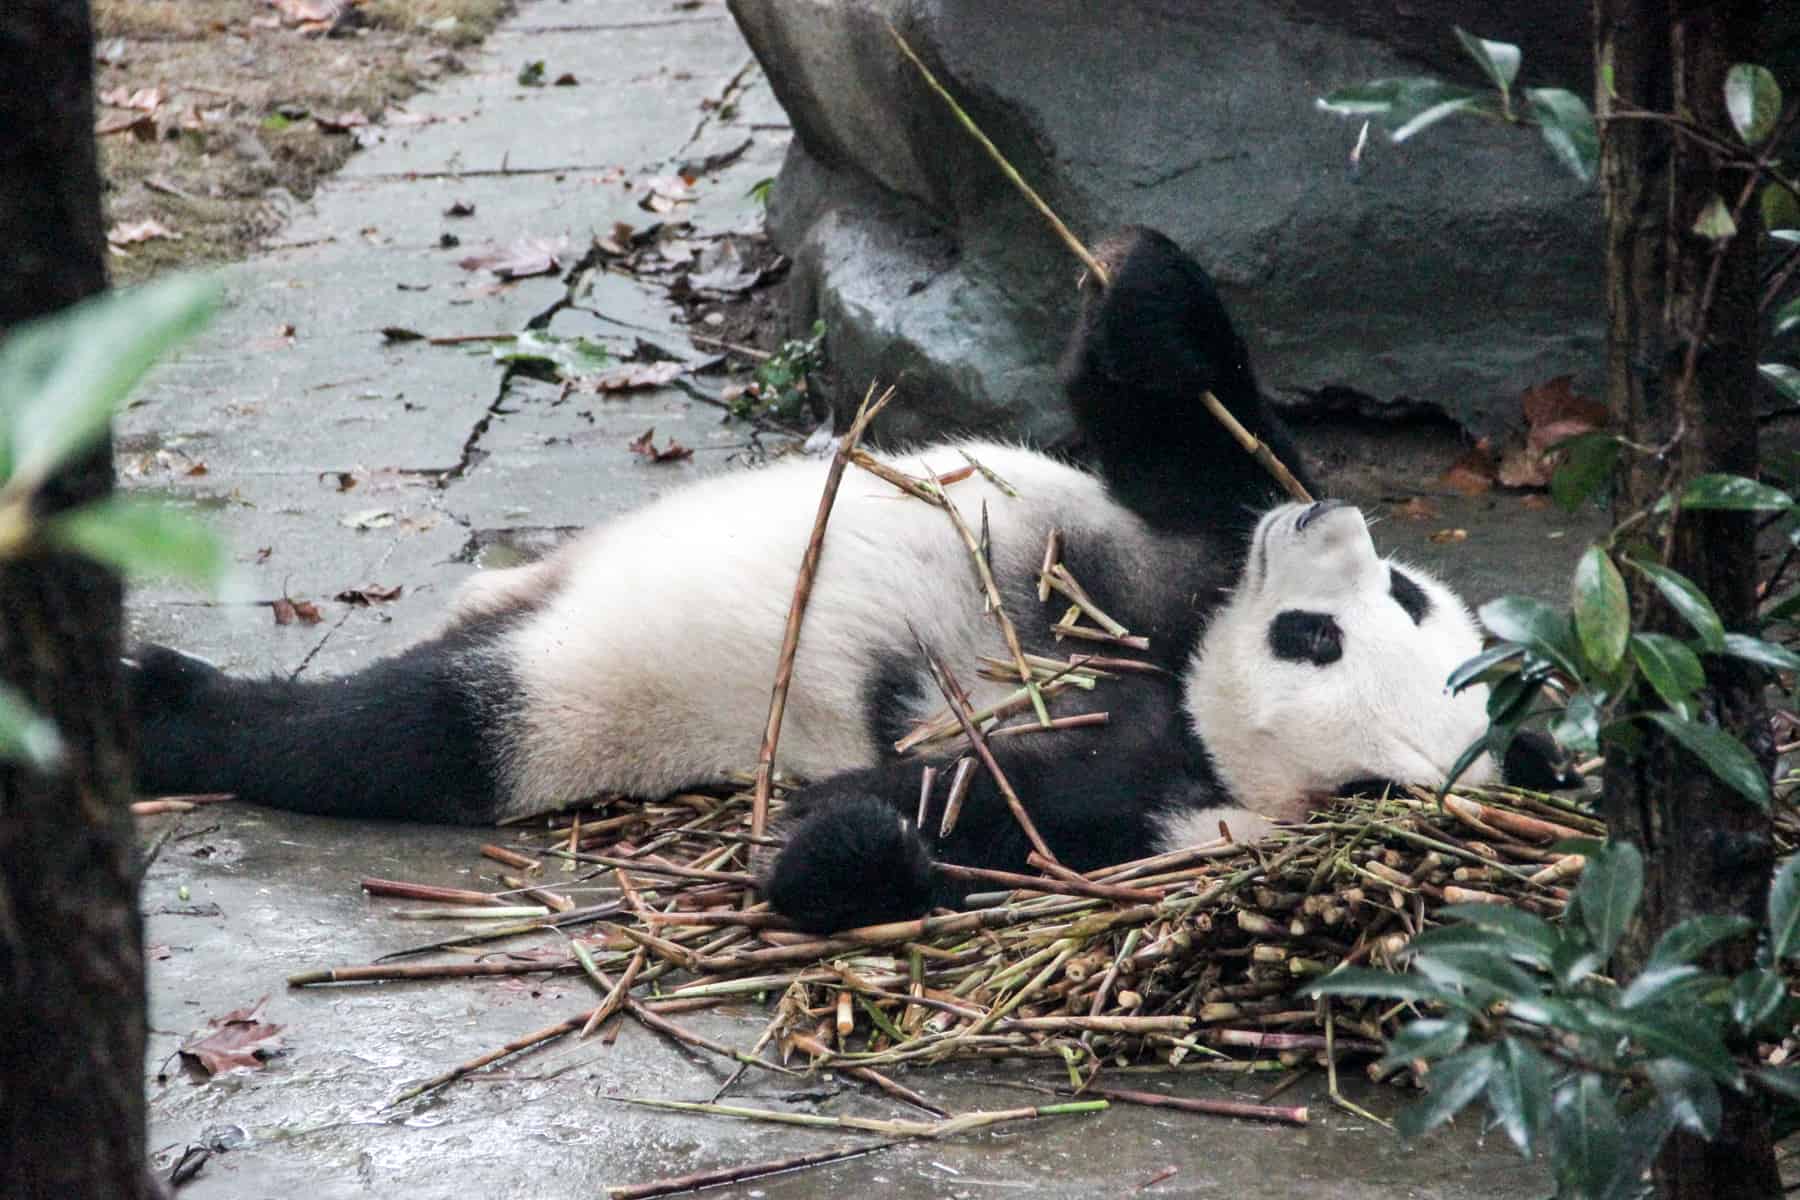 Panda eating Bamboo off its belly, seen on a Chengdu Panda Tour in China